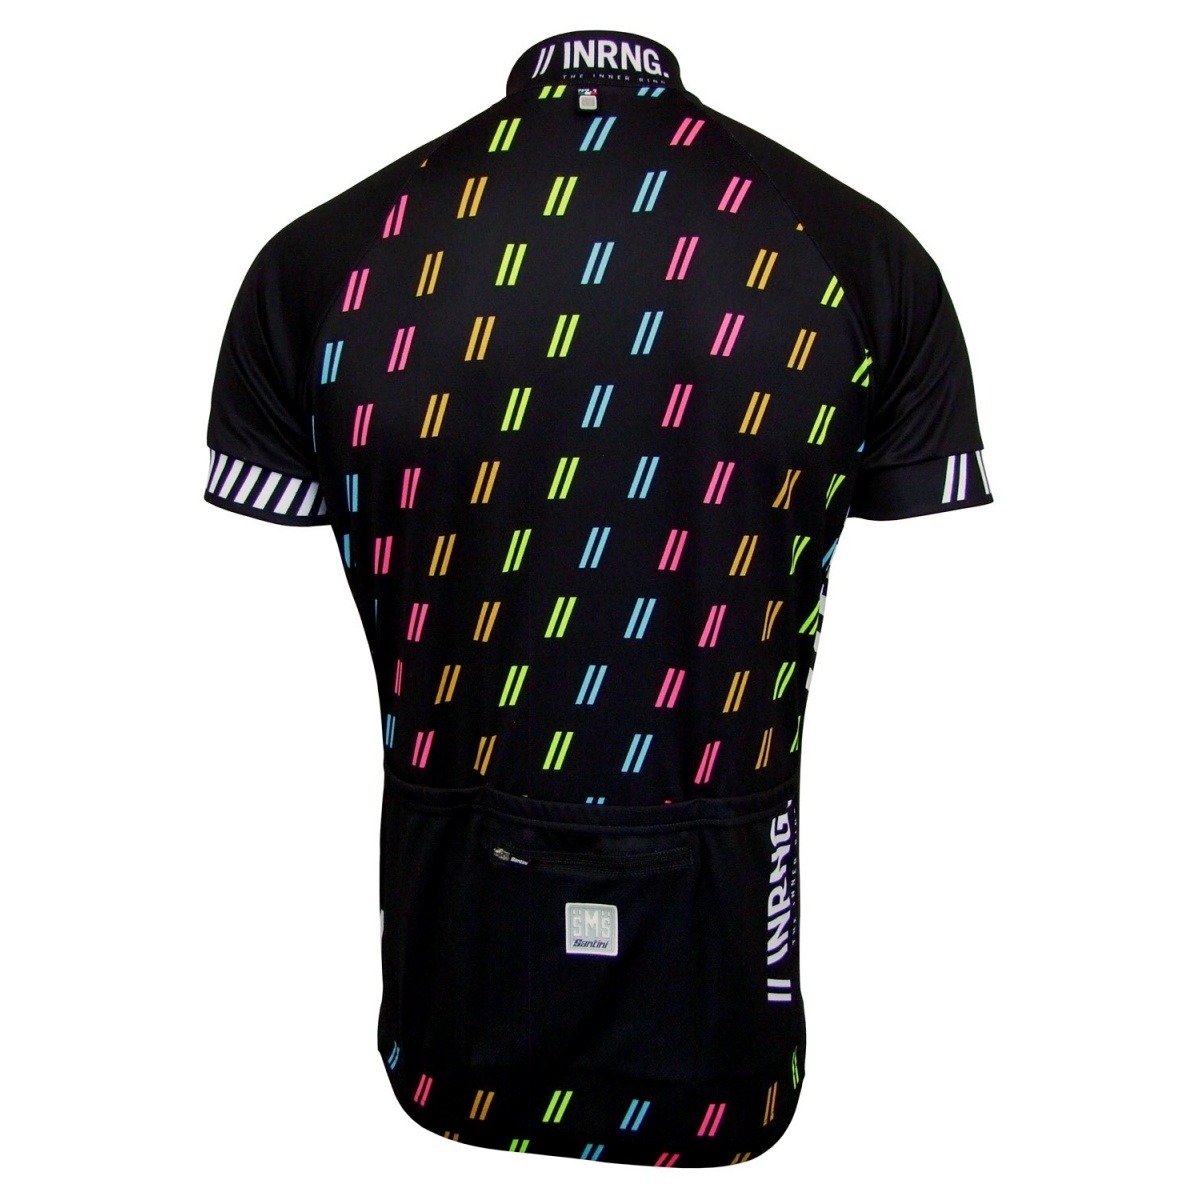 INRNG supporter jersey